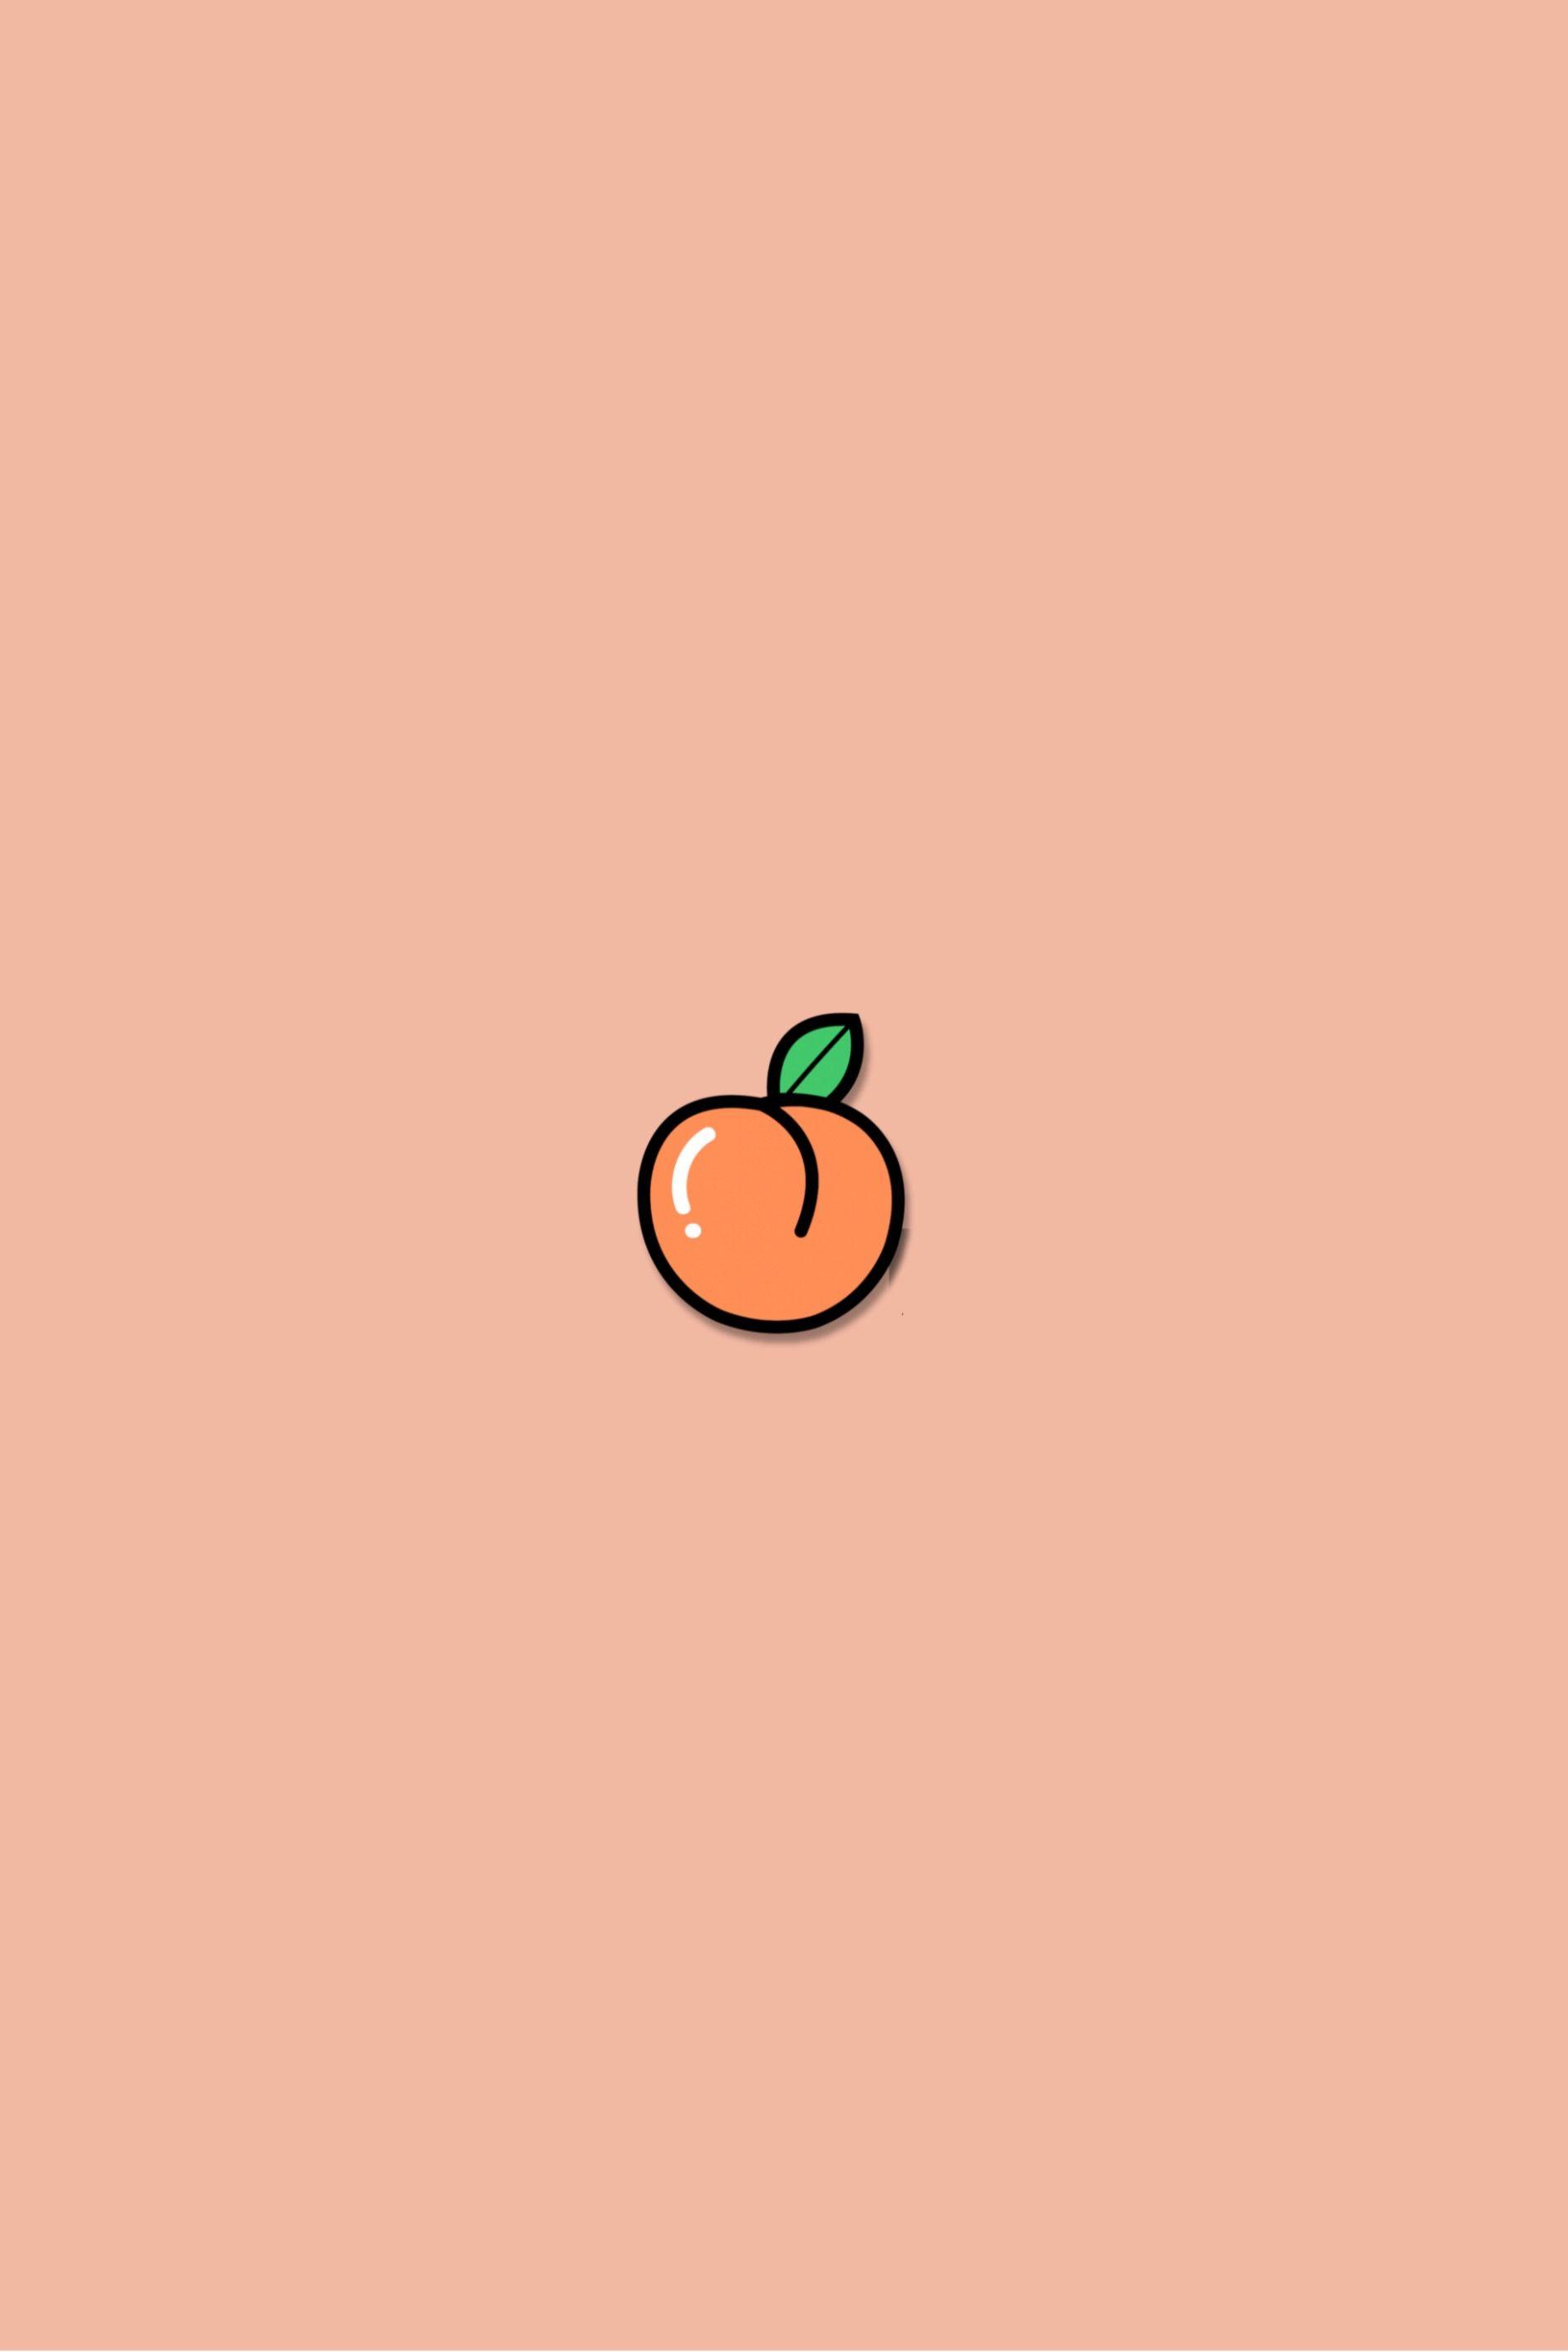 DRESS UP YOUR TECH  Peach wallpaper Orange aesthetic Just peachy